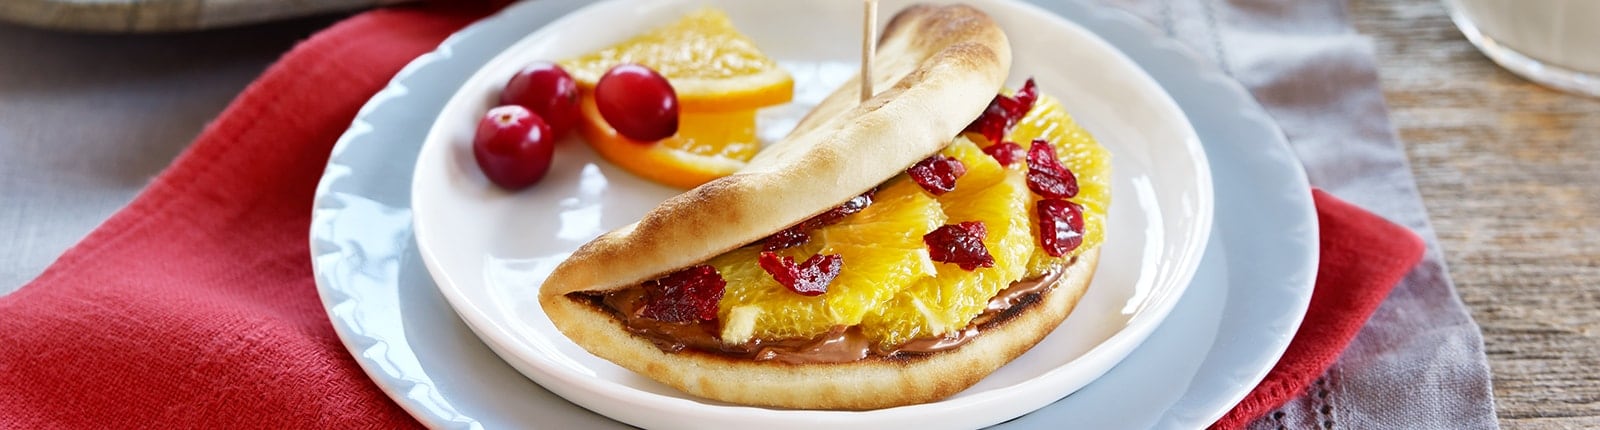 Naan tacos with orange, cranberries and Nutella<sup>®</sup>